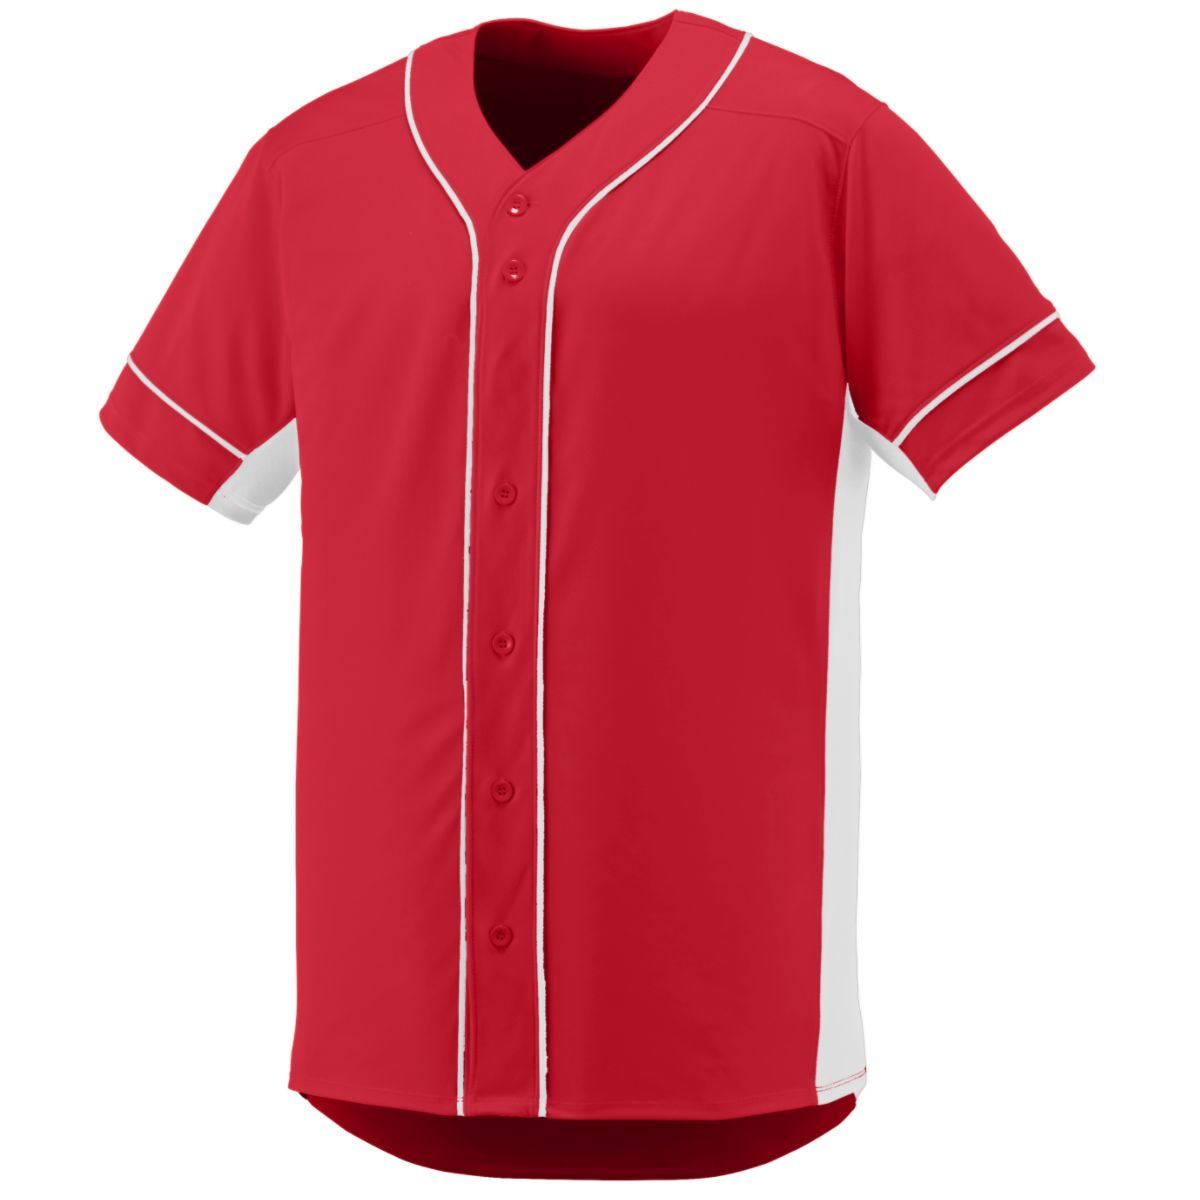 Augusta Sportswear Slugger Jersey in Red/White  -Part of the Adult, Adult-Jersey, Augusta-Products, Baseball, Shirts, All-Sports, All-Sports-1 product lines at KanaleyCreations.com